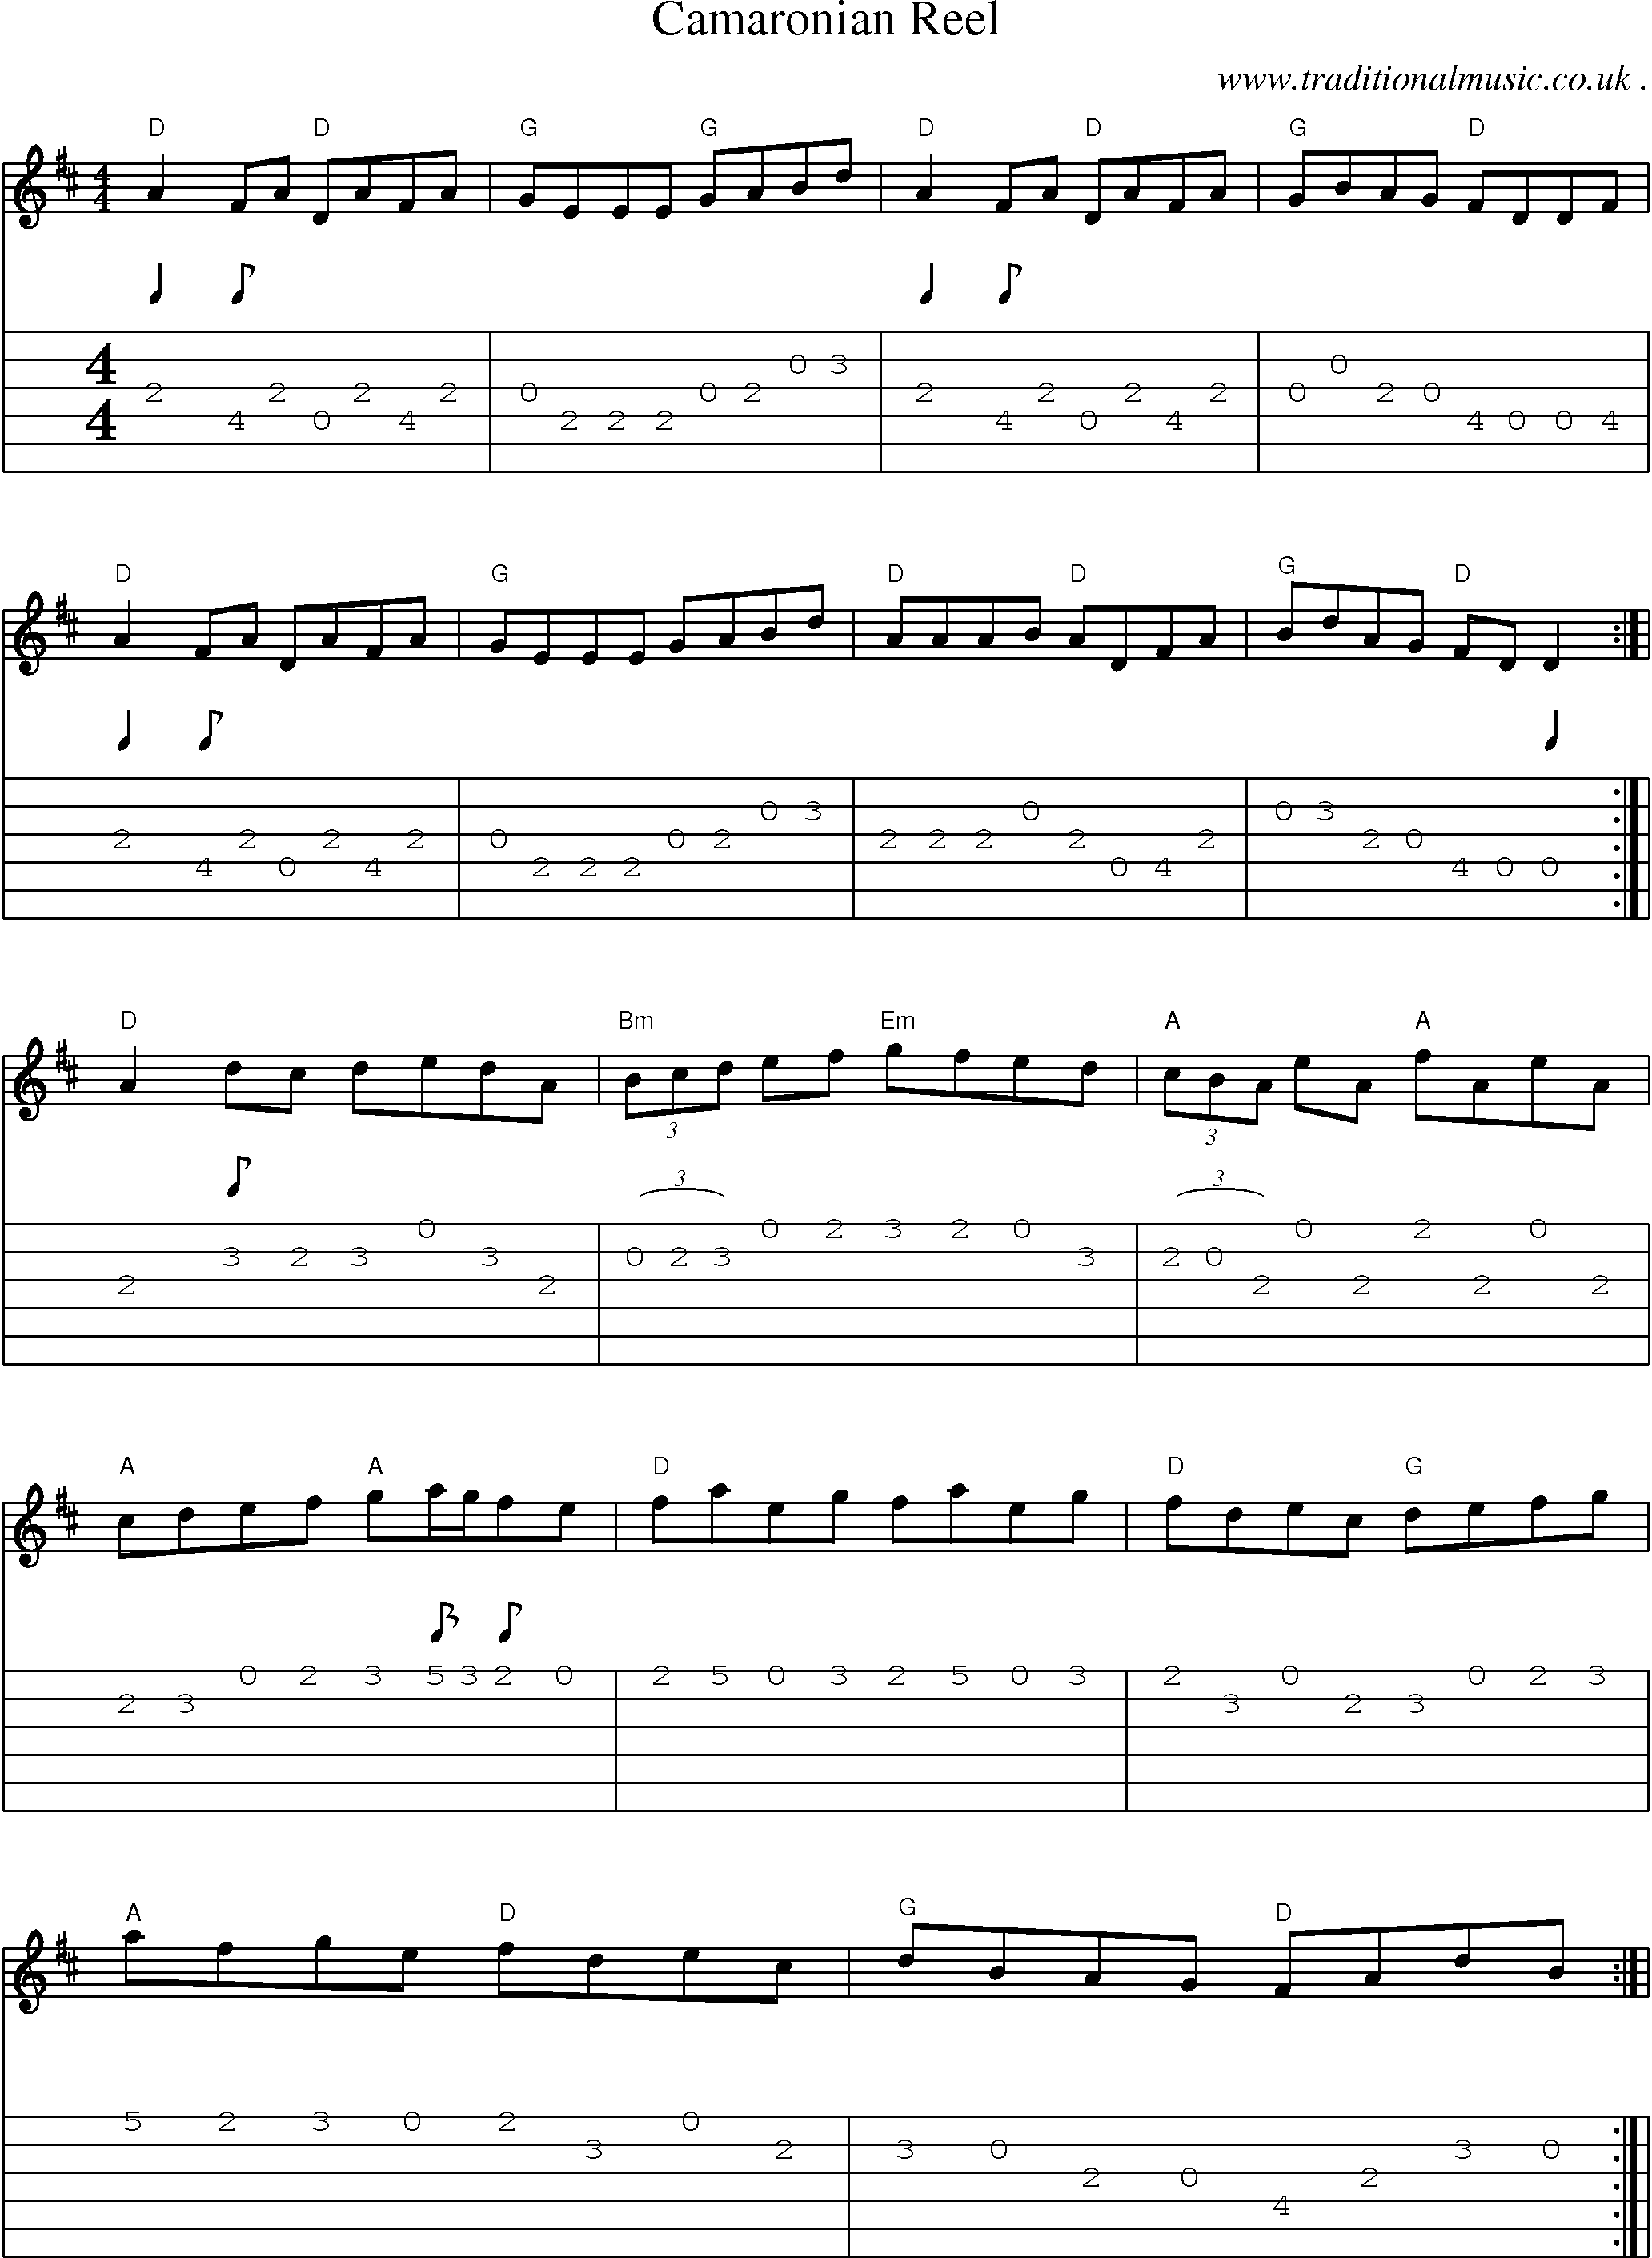 Music Score and Guitar Tabs for Camaronian Reel